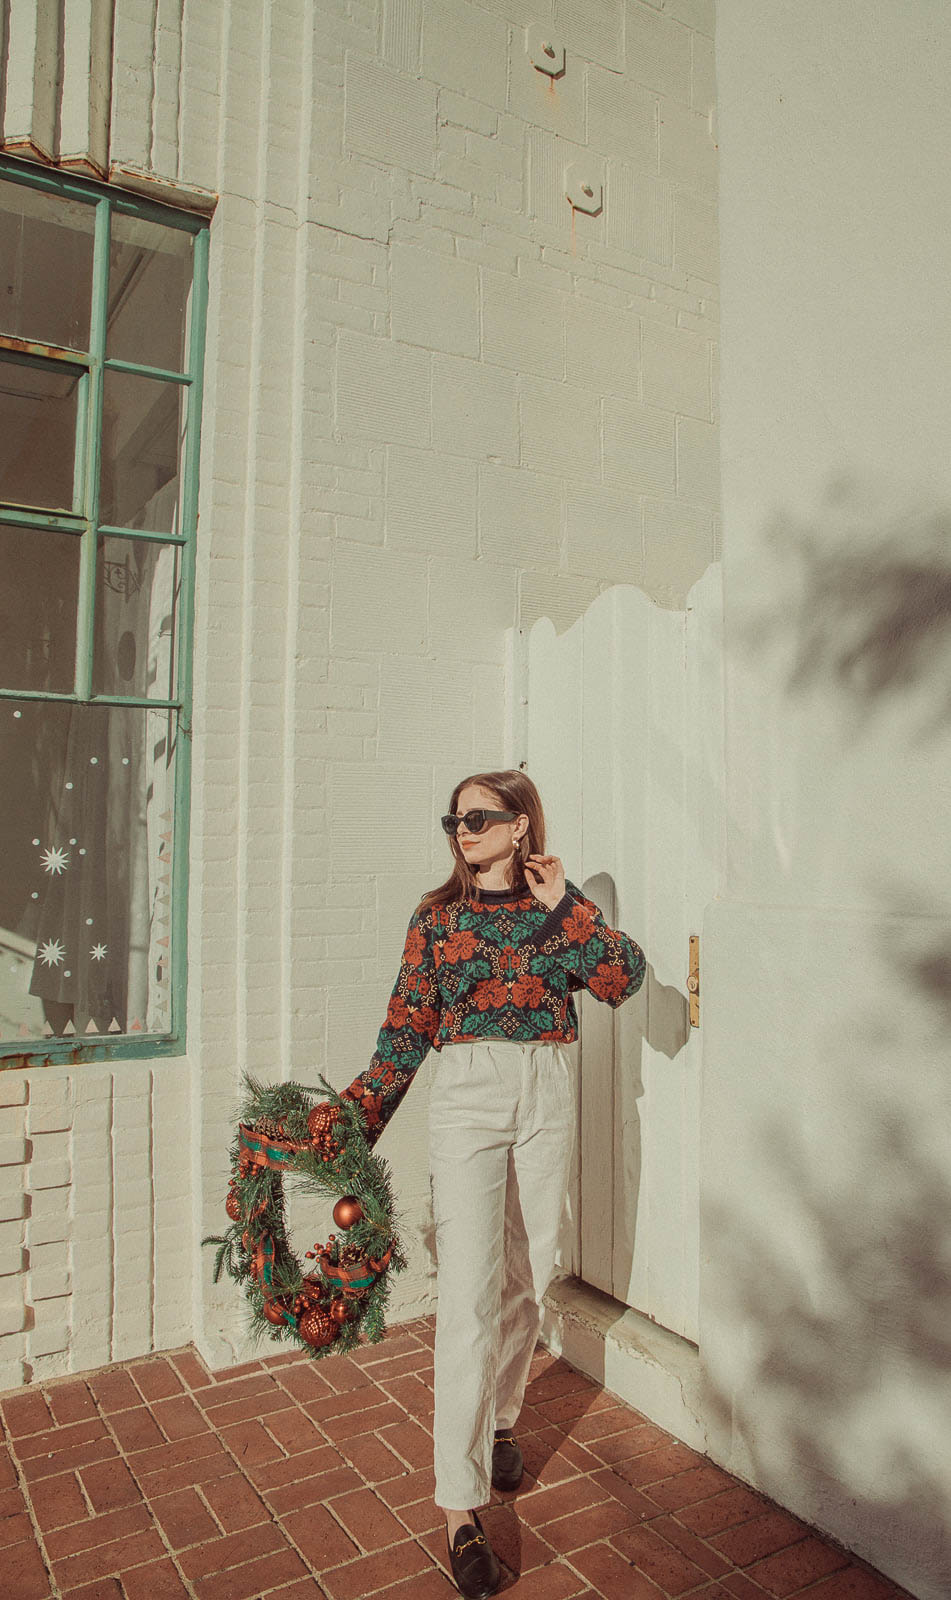 Photoshoot with Christmas wreath, woman wearing Christmas sweater - 5 Creative Christmas Photoshoot Ideas to Try This Season